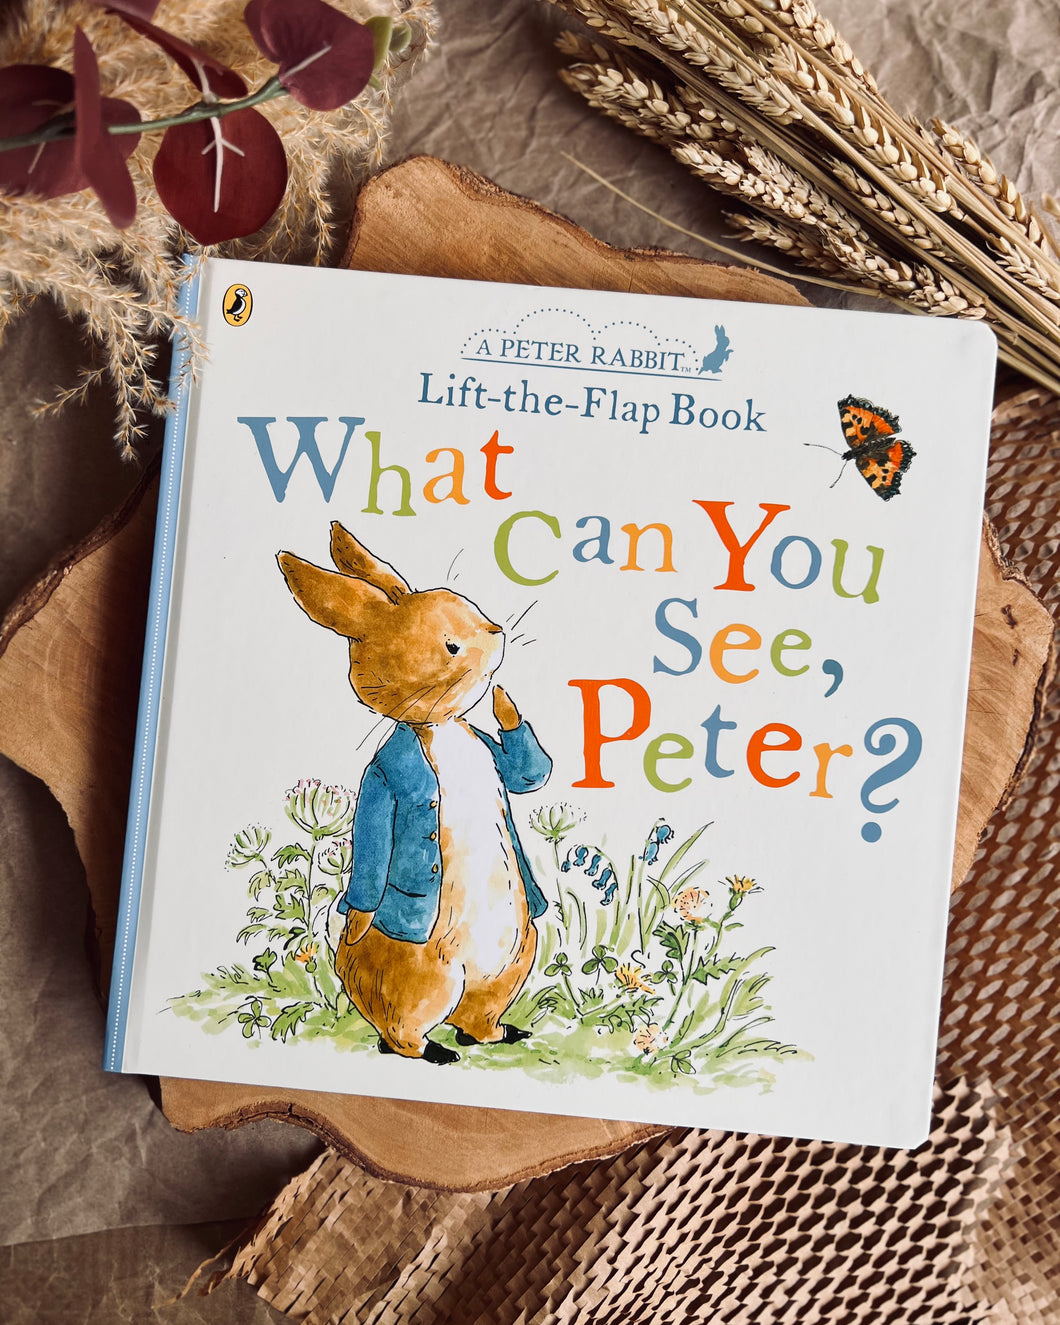 Peter Rabbit: What Can You See Peter? A Lift-the-flap book